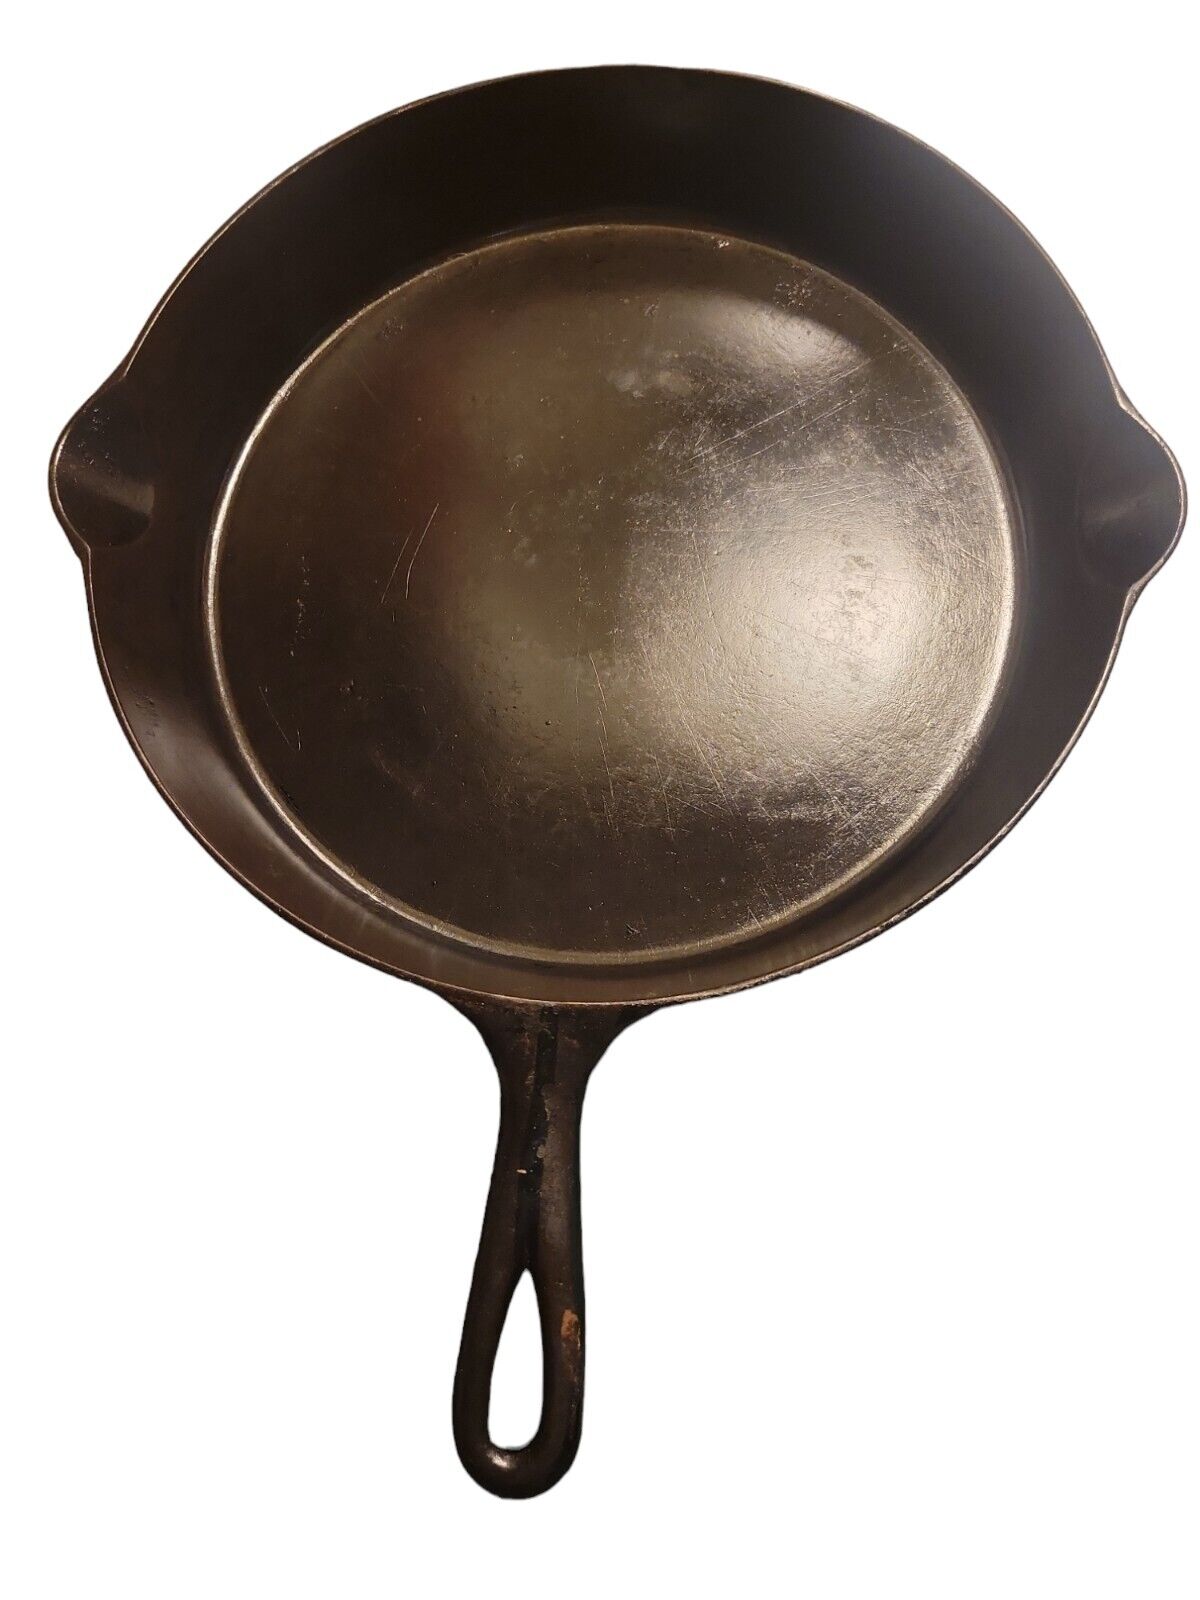 Pre Griswold Erie 1st Series #12 Cast Iron Skillet Circa 1860s-80s